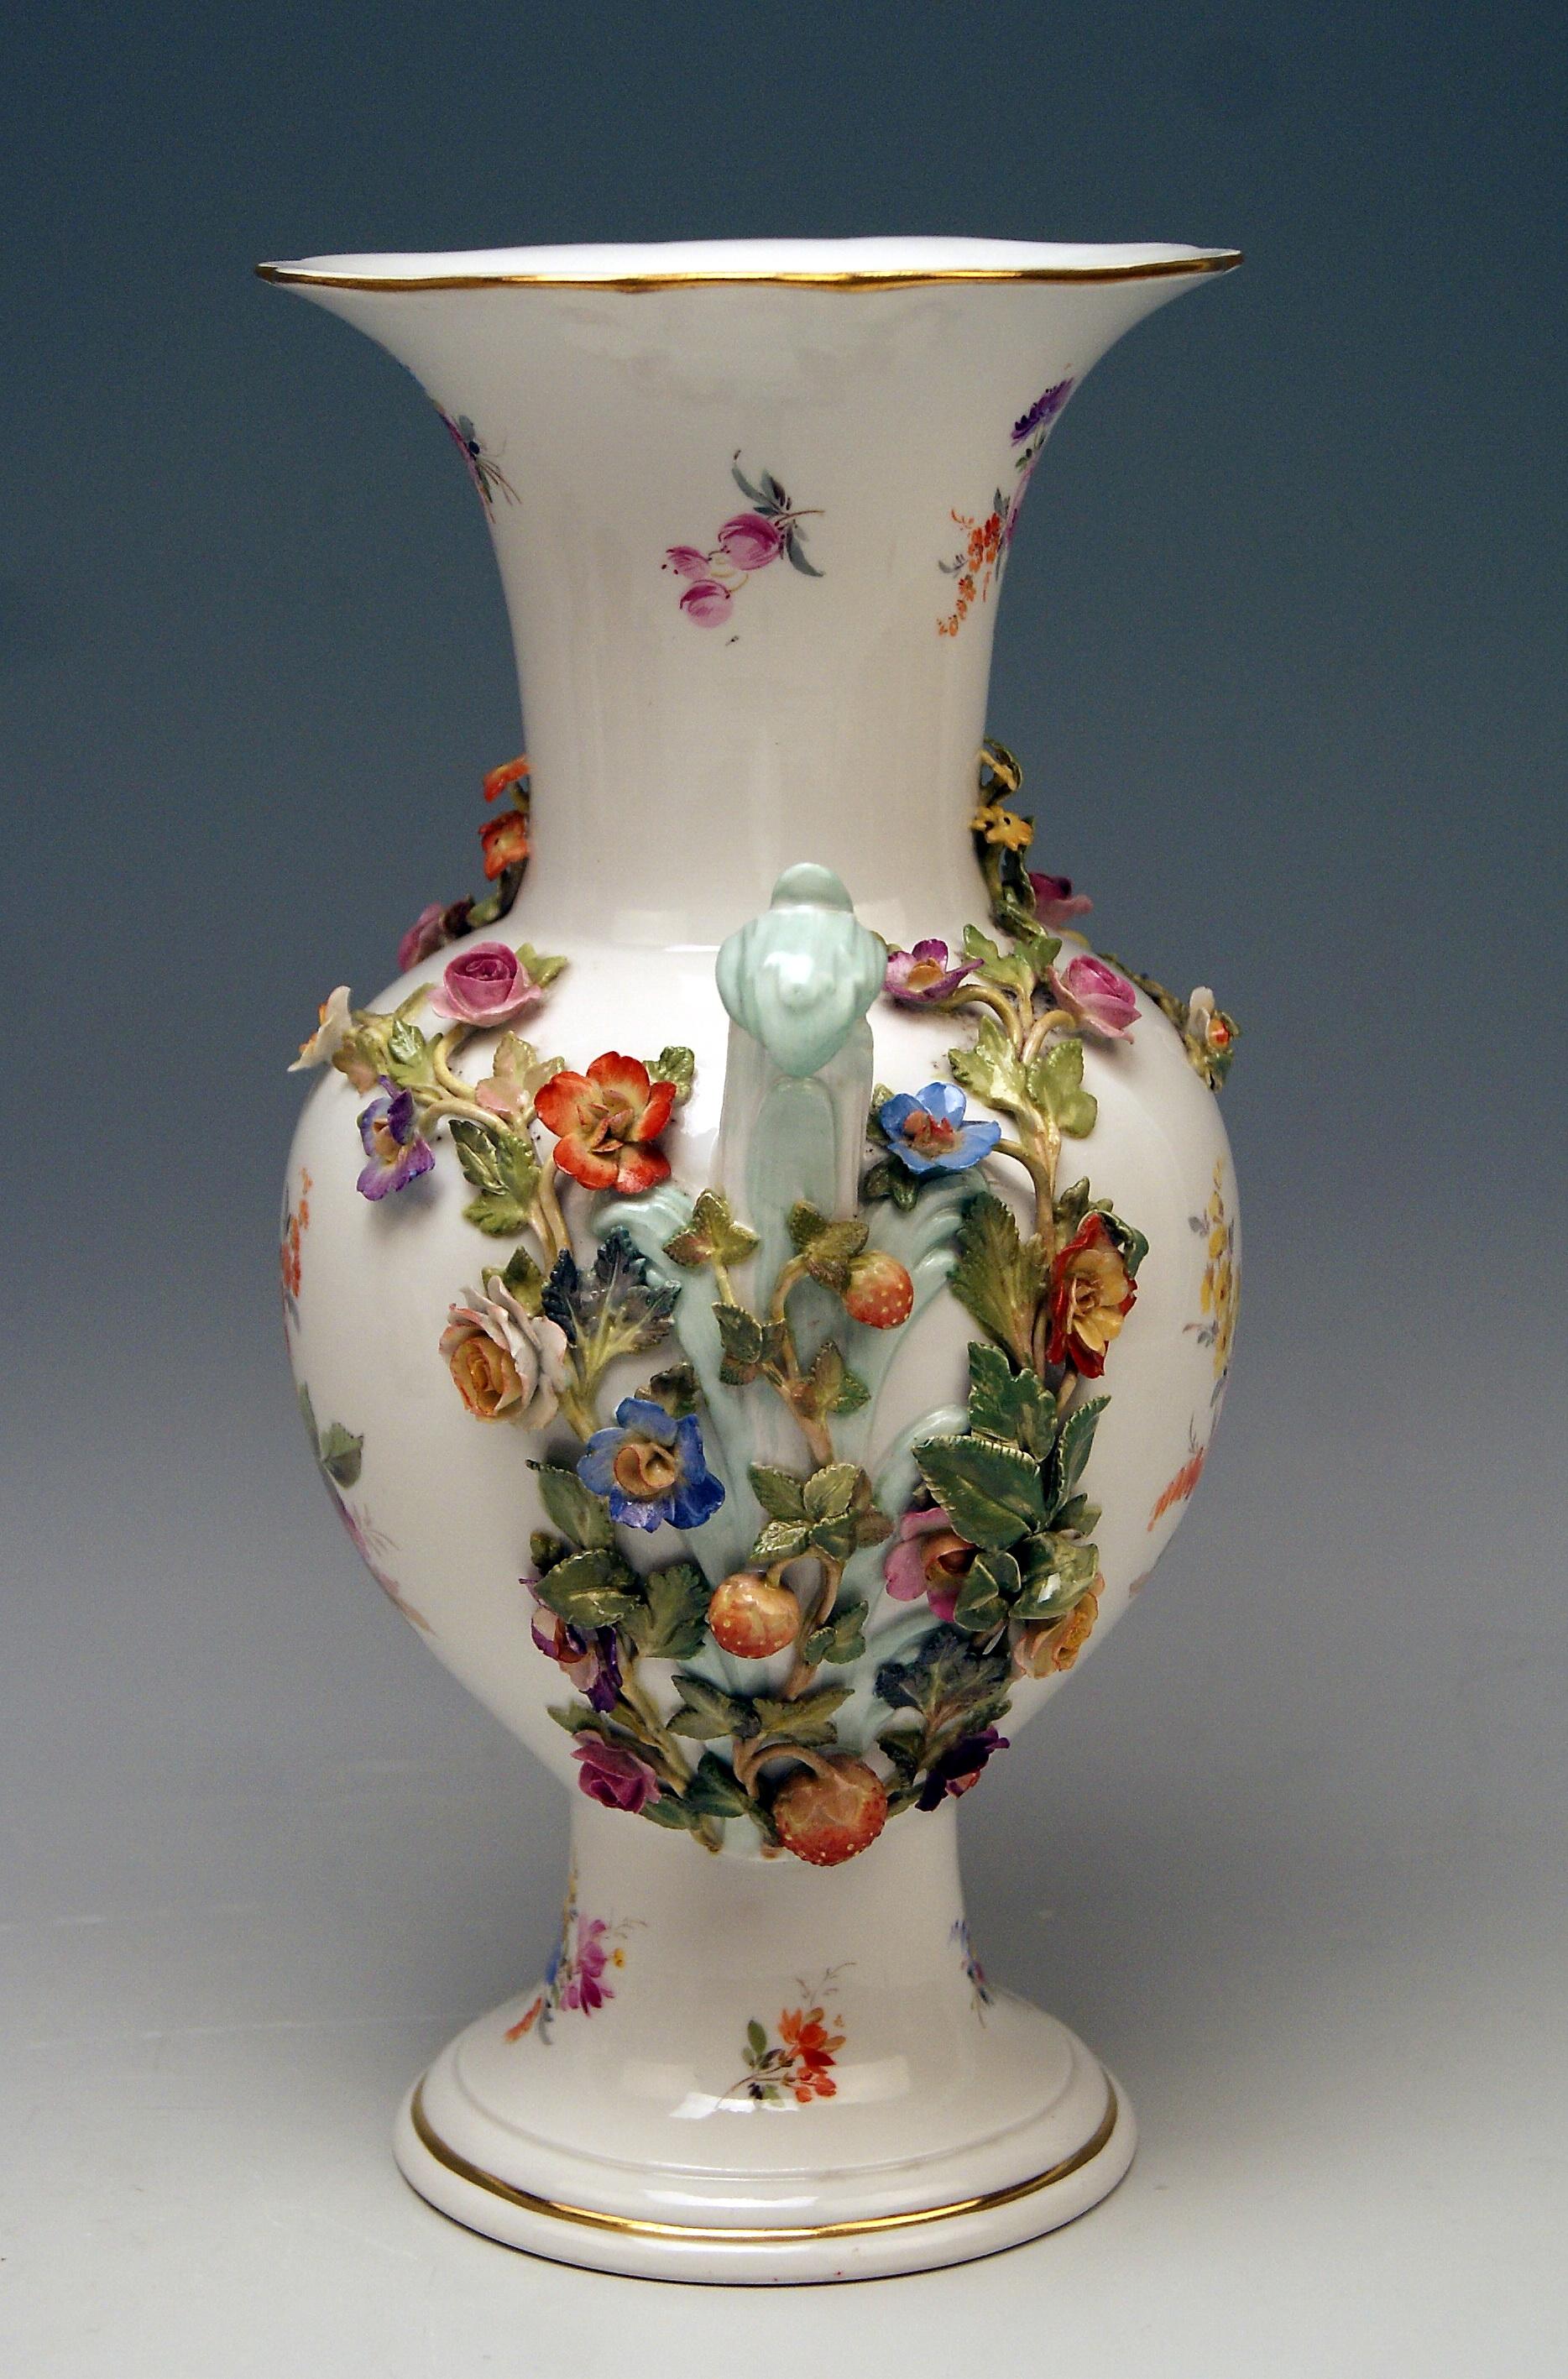 Meissen nicest vase with handles, decorated with sculptured flowers and fruits.

Manufactory: Meissen 
Dating: made circa 1870
Hallmarked: Meissen Mark with Pommels on Hilts (third quarter of 19th century)
First Quality
model number visible,